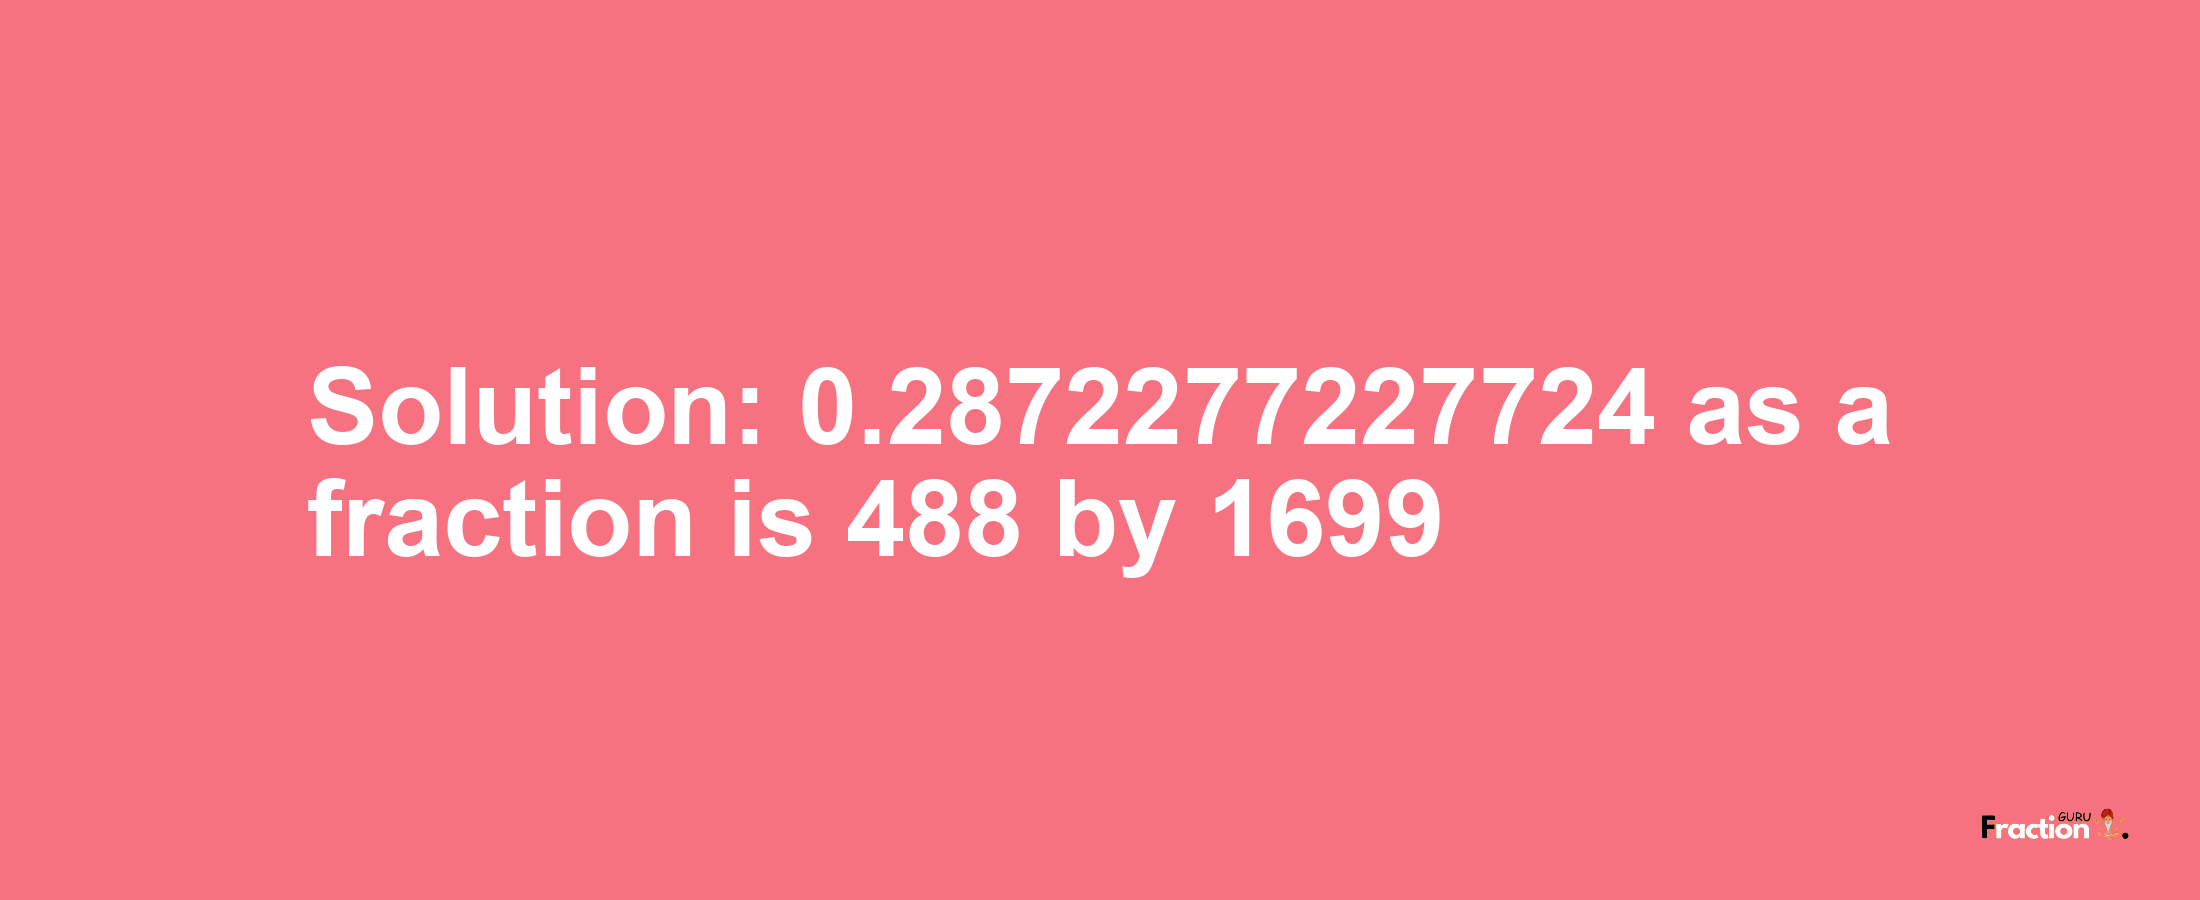 Solution:0.2872277227724 as a fraction is 488/1699